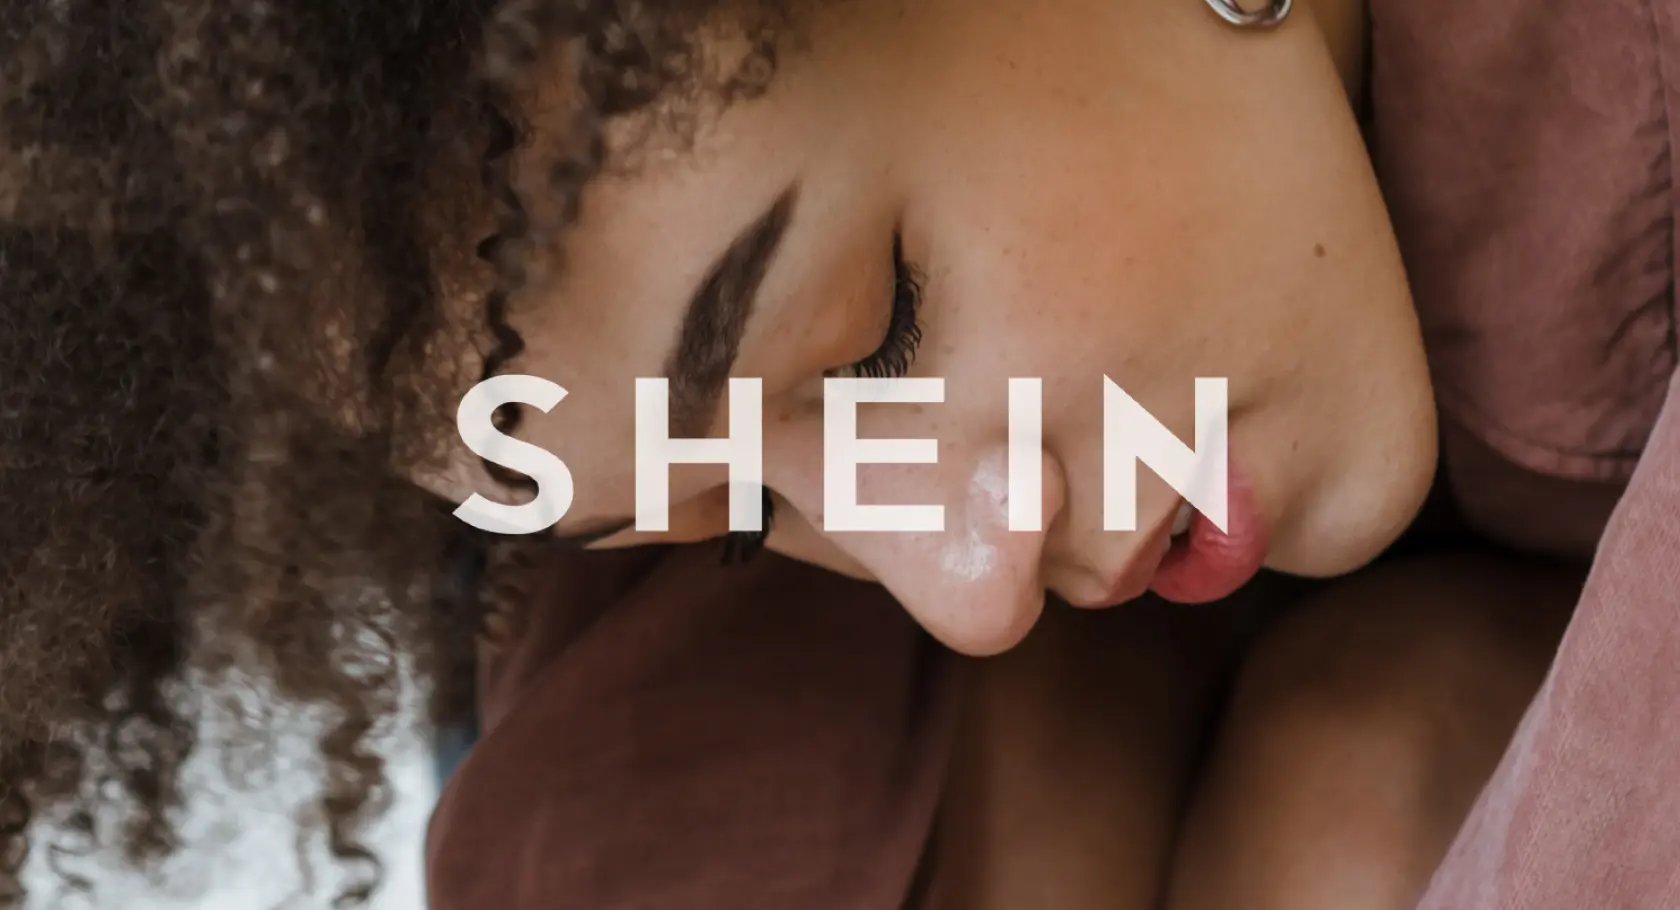 How To Change Reference Code On SHEIN